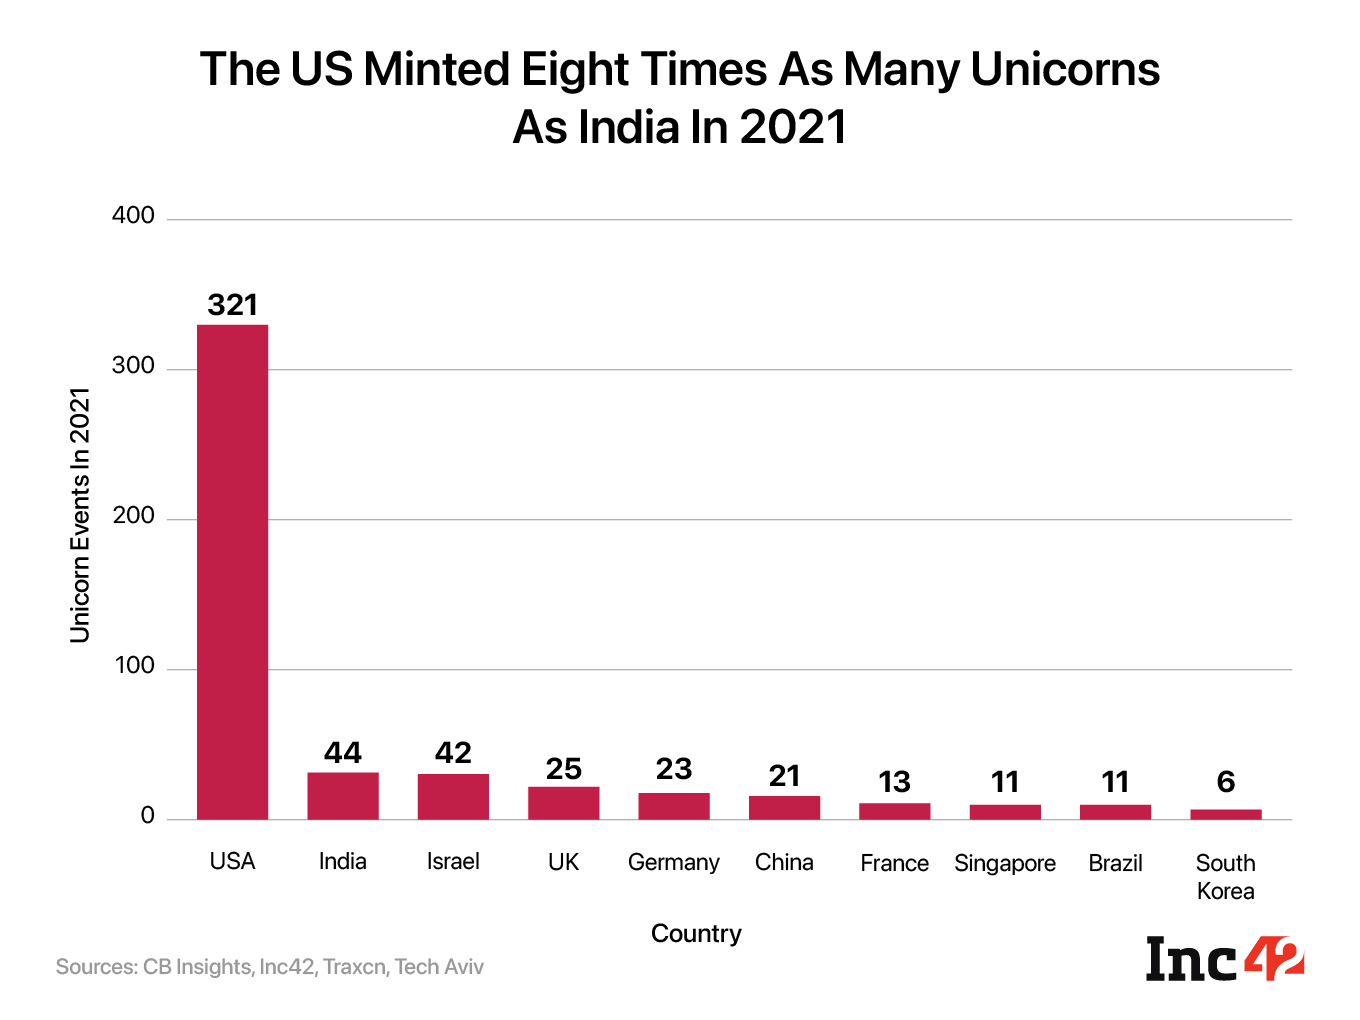 the US minted eight times as many unicorns as India in 2021